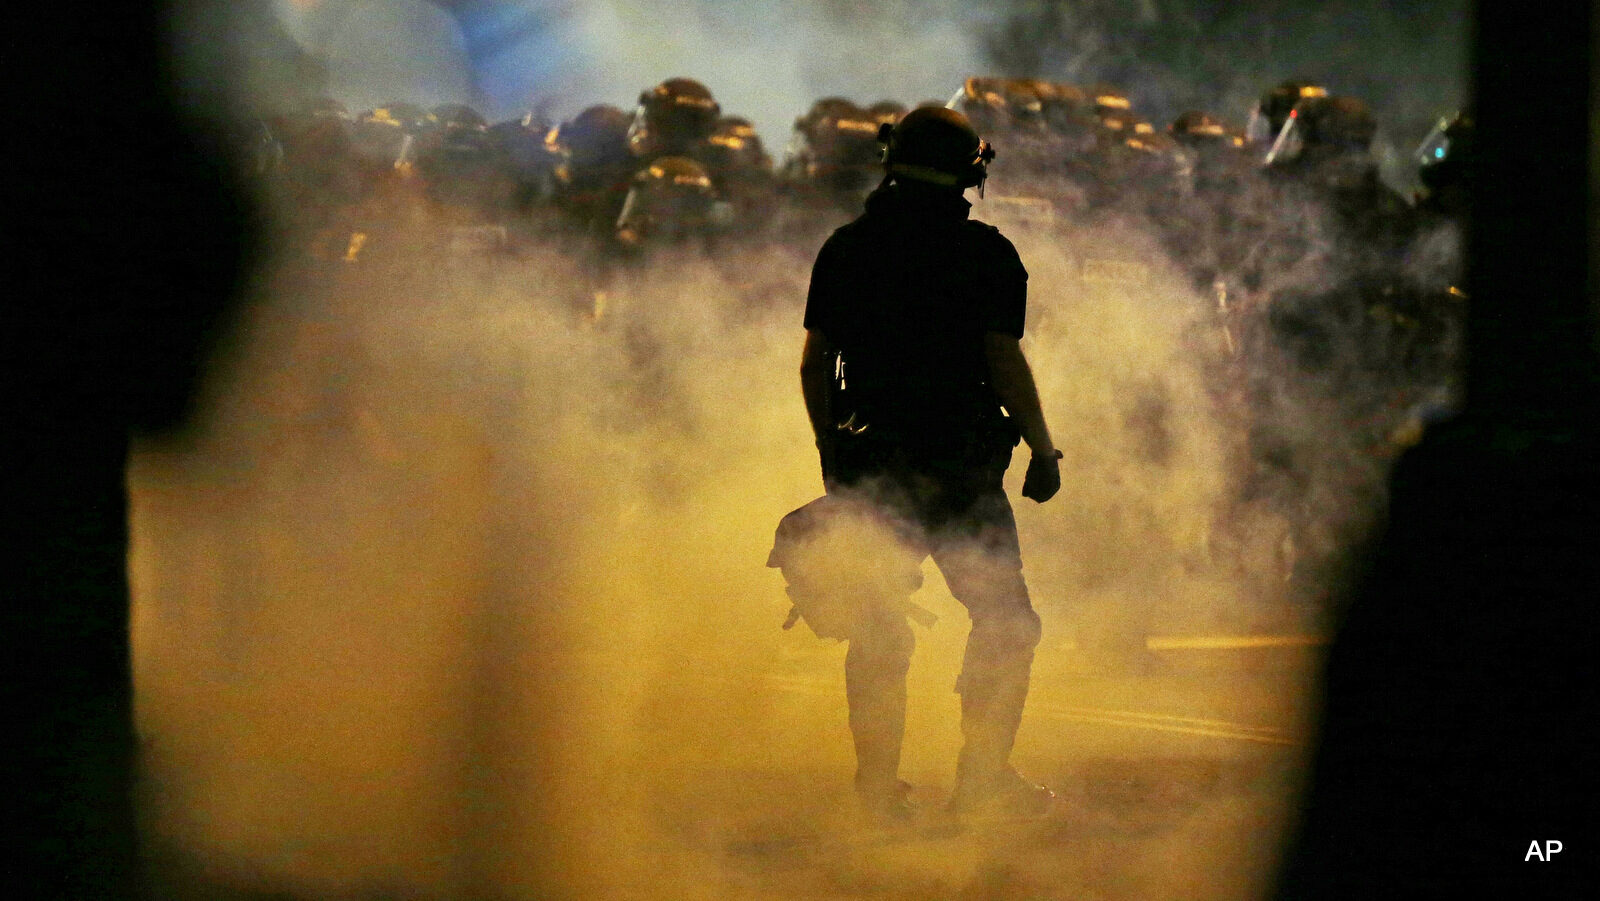 Police fire teargas as protestors converge on downtown following Tuesday's police shooting of Keith Lamont Scott in Charlotte, N.C., Wednesday, Sept. 21, 2016. Protesters have rushed police in riot gear at a downtown Charlotte hotel and officers have fired tear gas to disperse the crowd. At least one person was injured in the confrontation, though it wasn't immediately clear how. Firefighters rushed in to pull the man to a waiting ambulance.